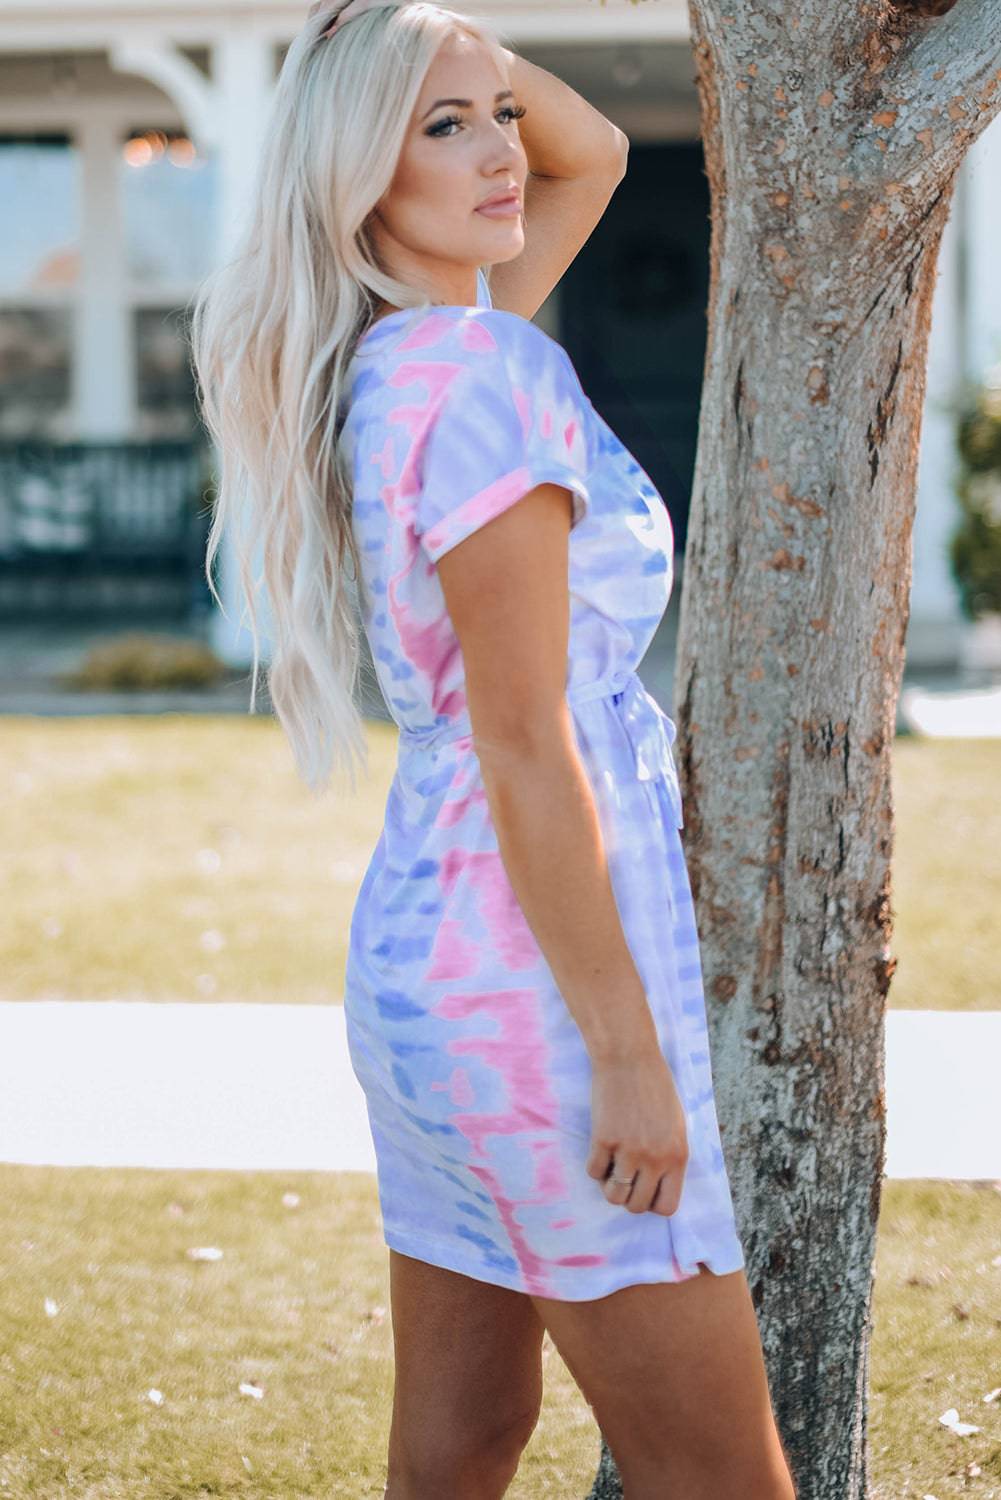 Summer Love Story Dress - Ignite Your Inner Goddess and Captivate Hearts with Enchanting Tie-Dye Magic. - Guy Christopher 